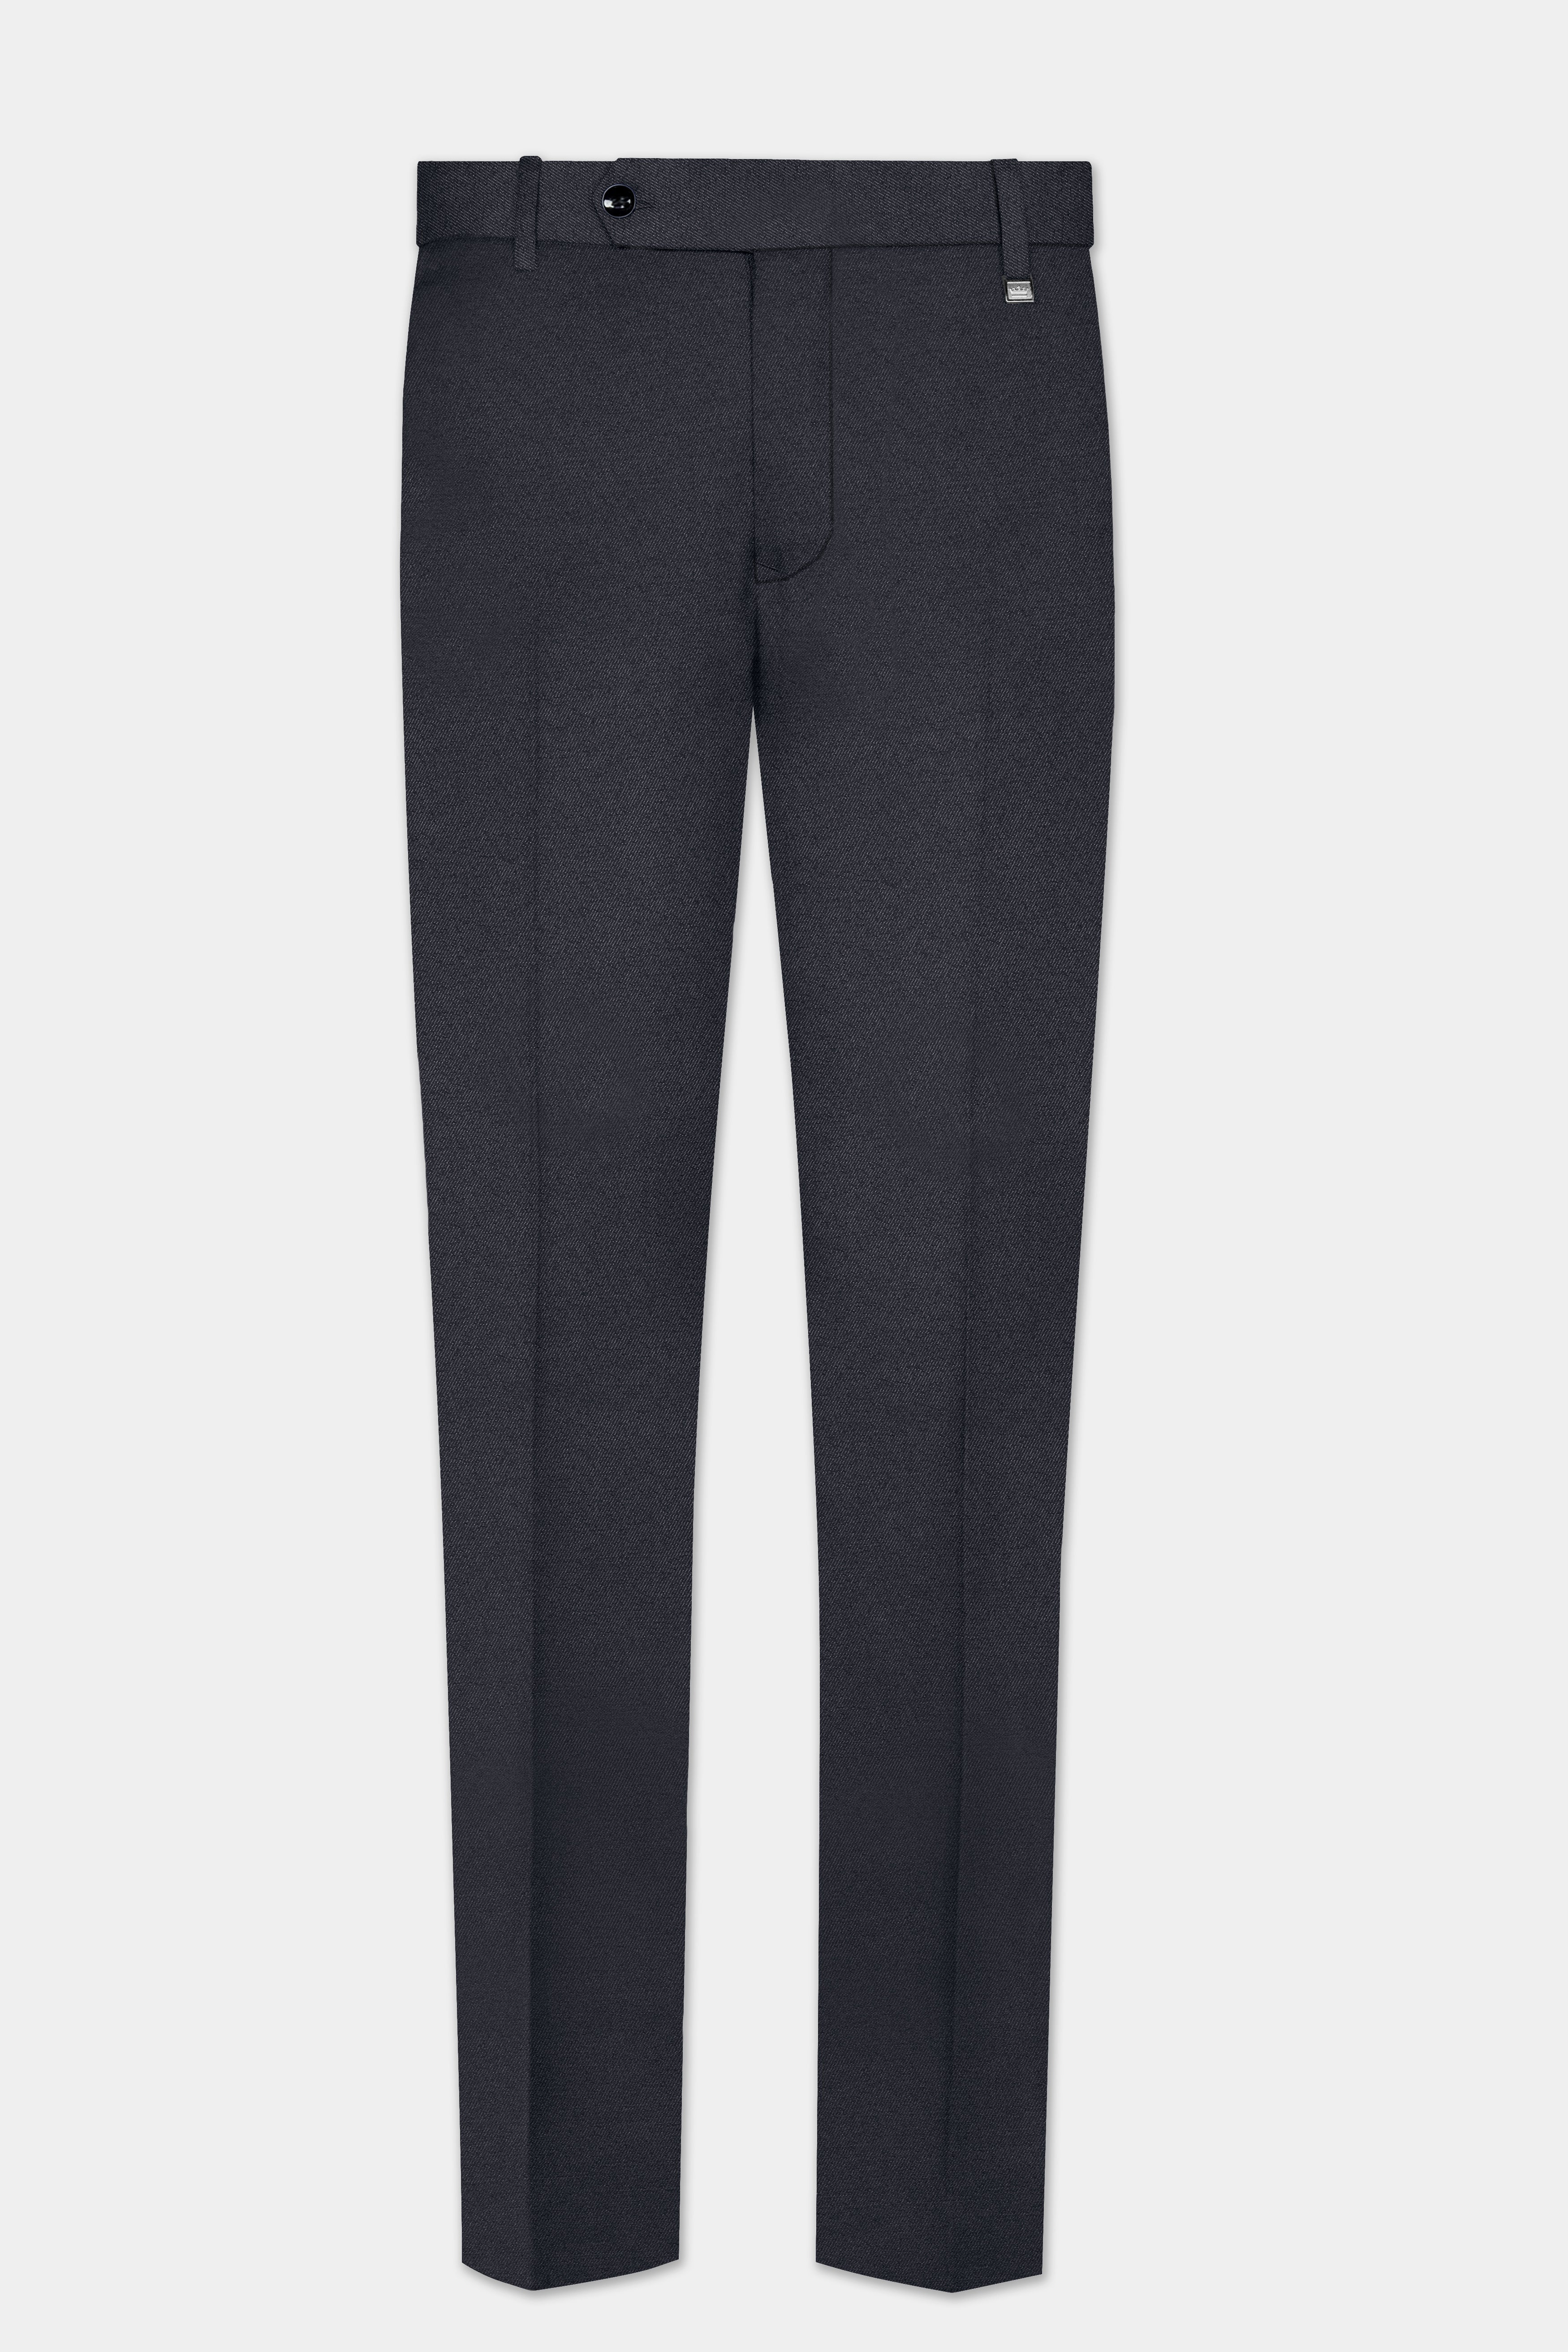 Piano Gray Wool Blend Double Breasted Suit